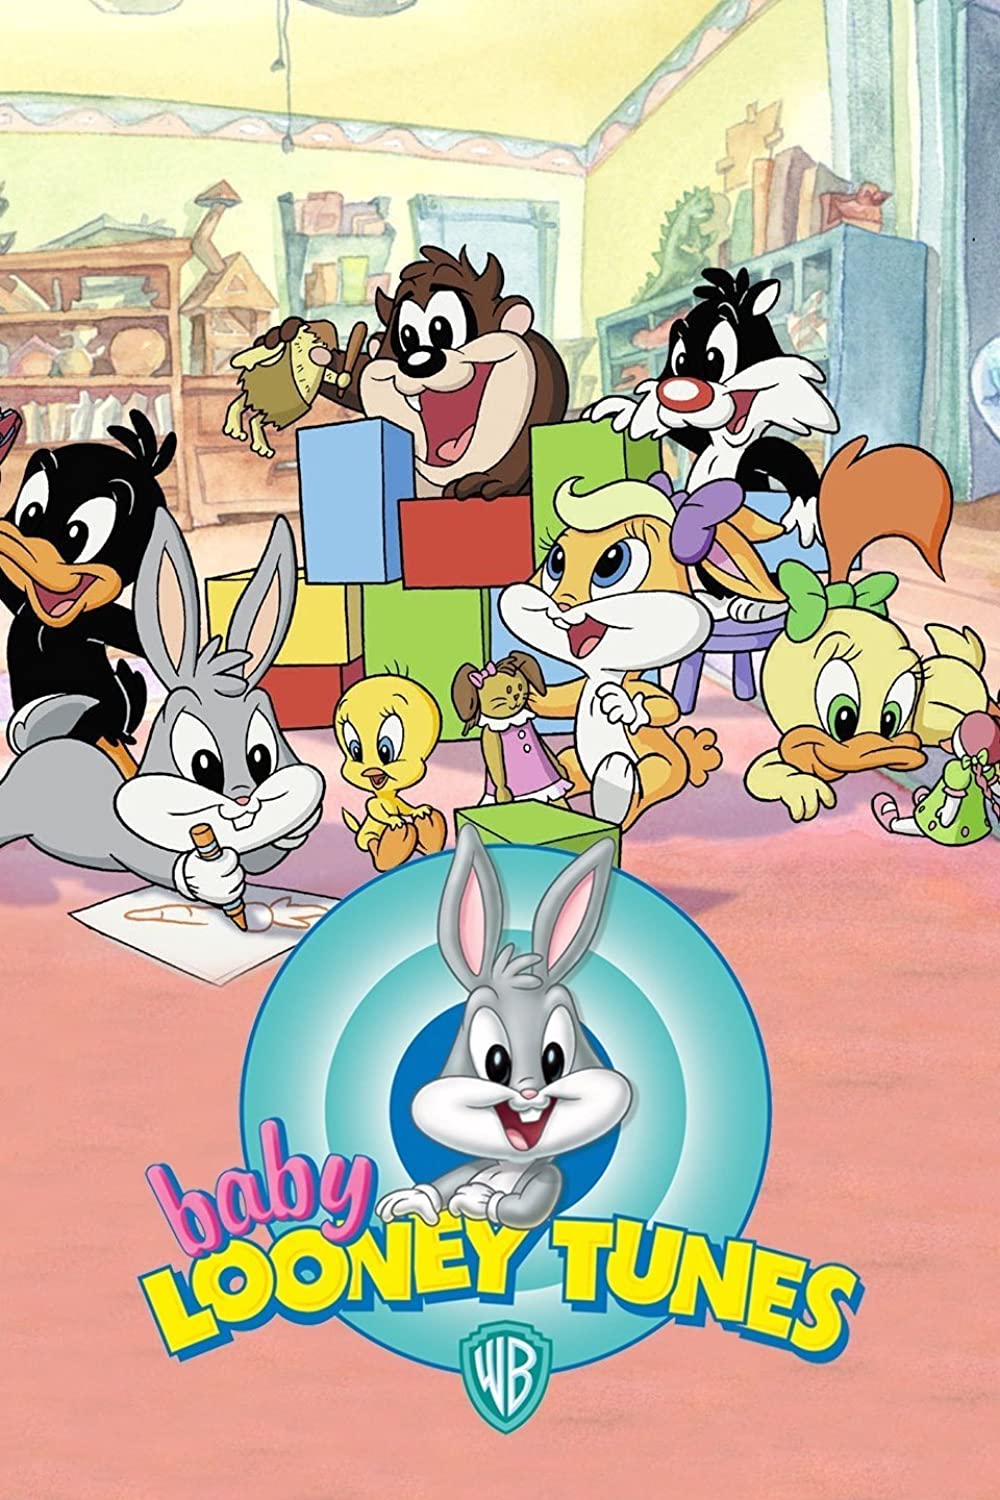 https://static.wikia.nocookie.net/international-entertainment-project/images/2/2d/Baby_Looney_Tunes_poster.jpg/revision/latest?cb=20220211020430